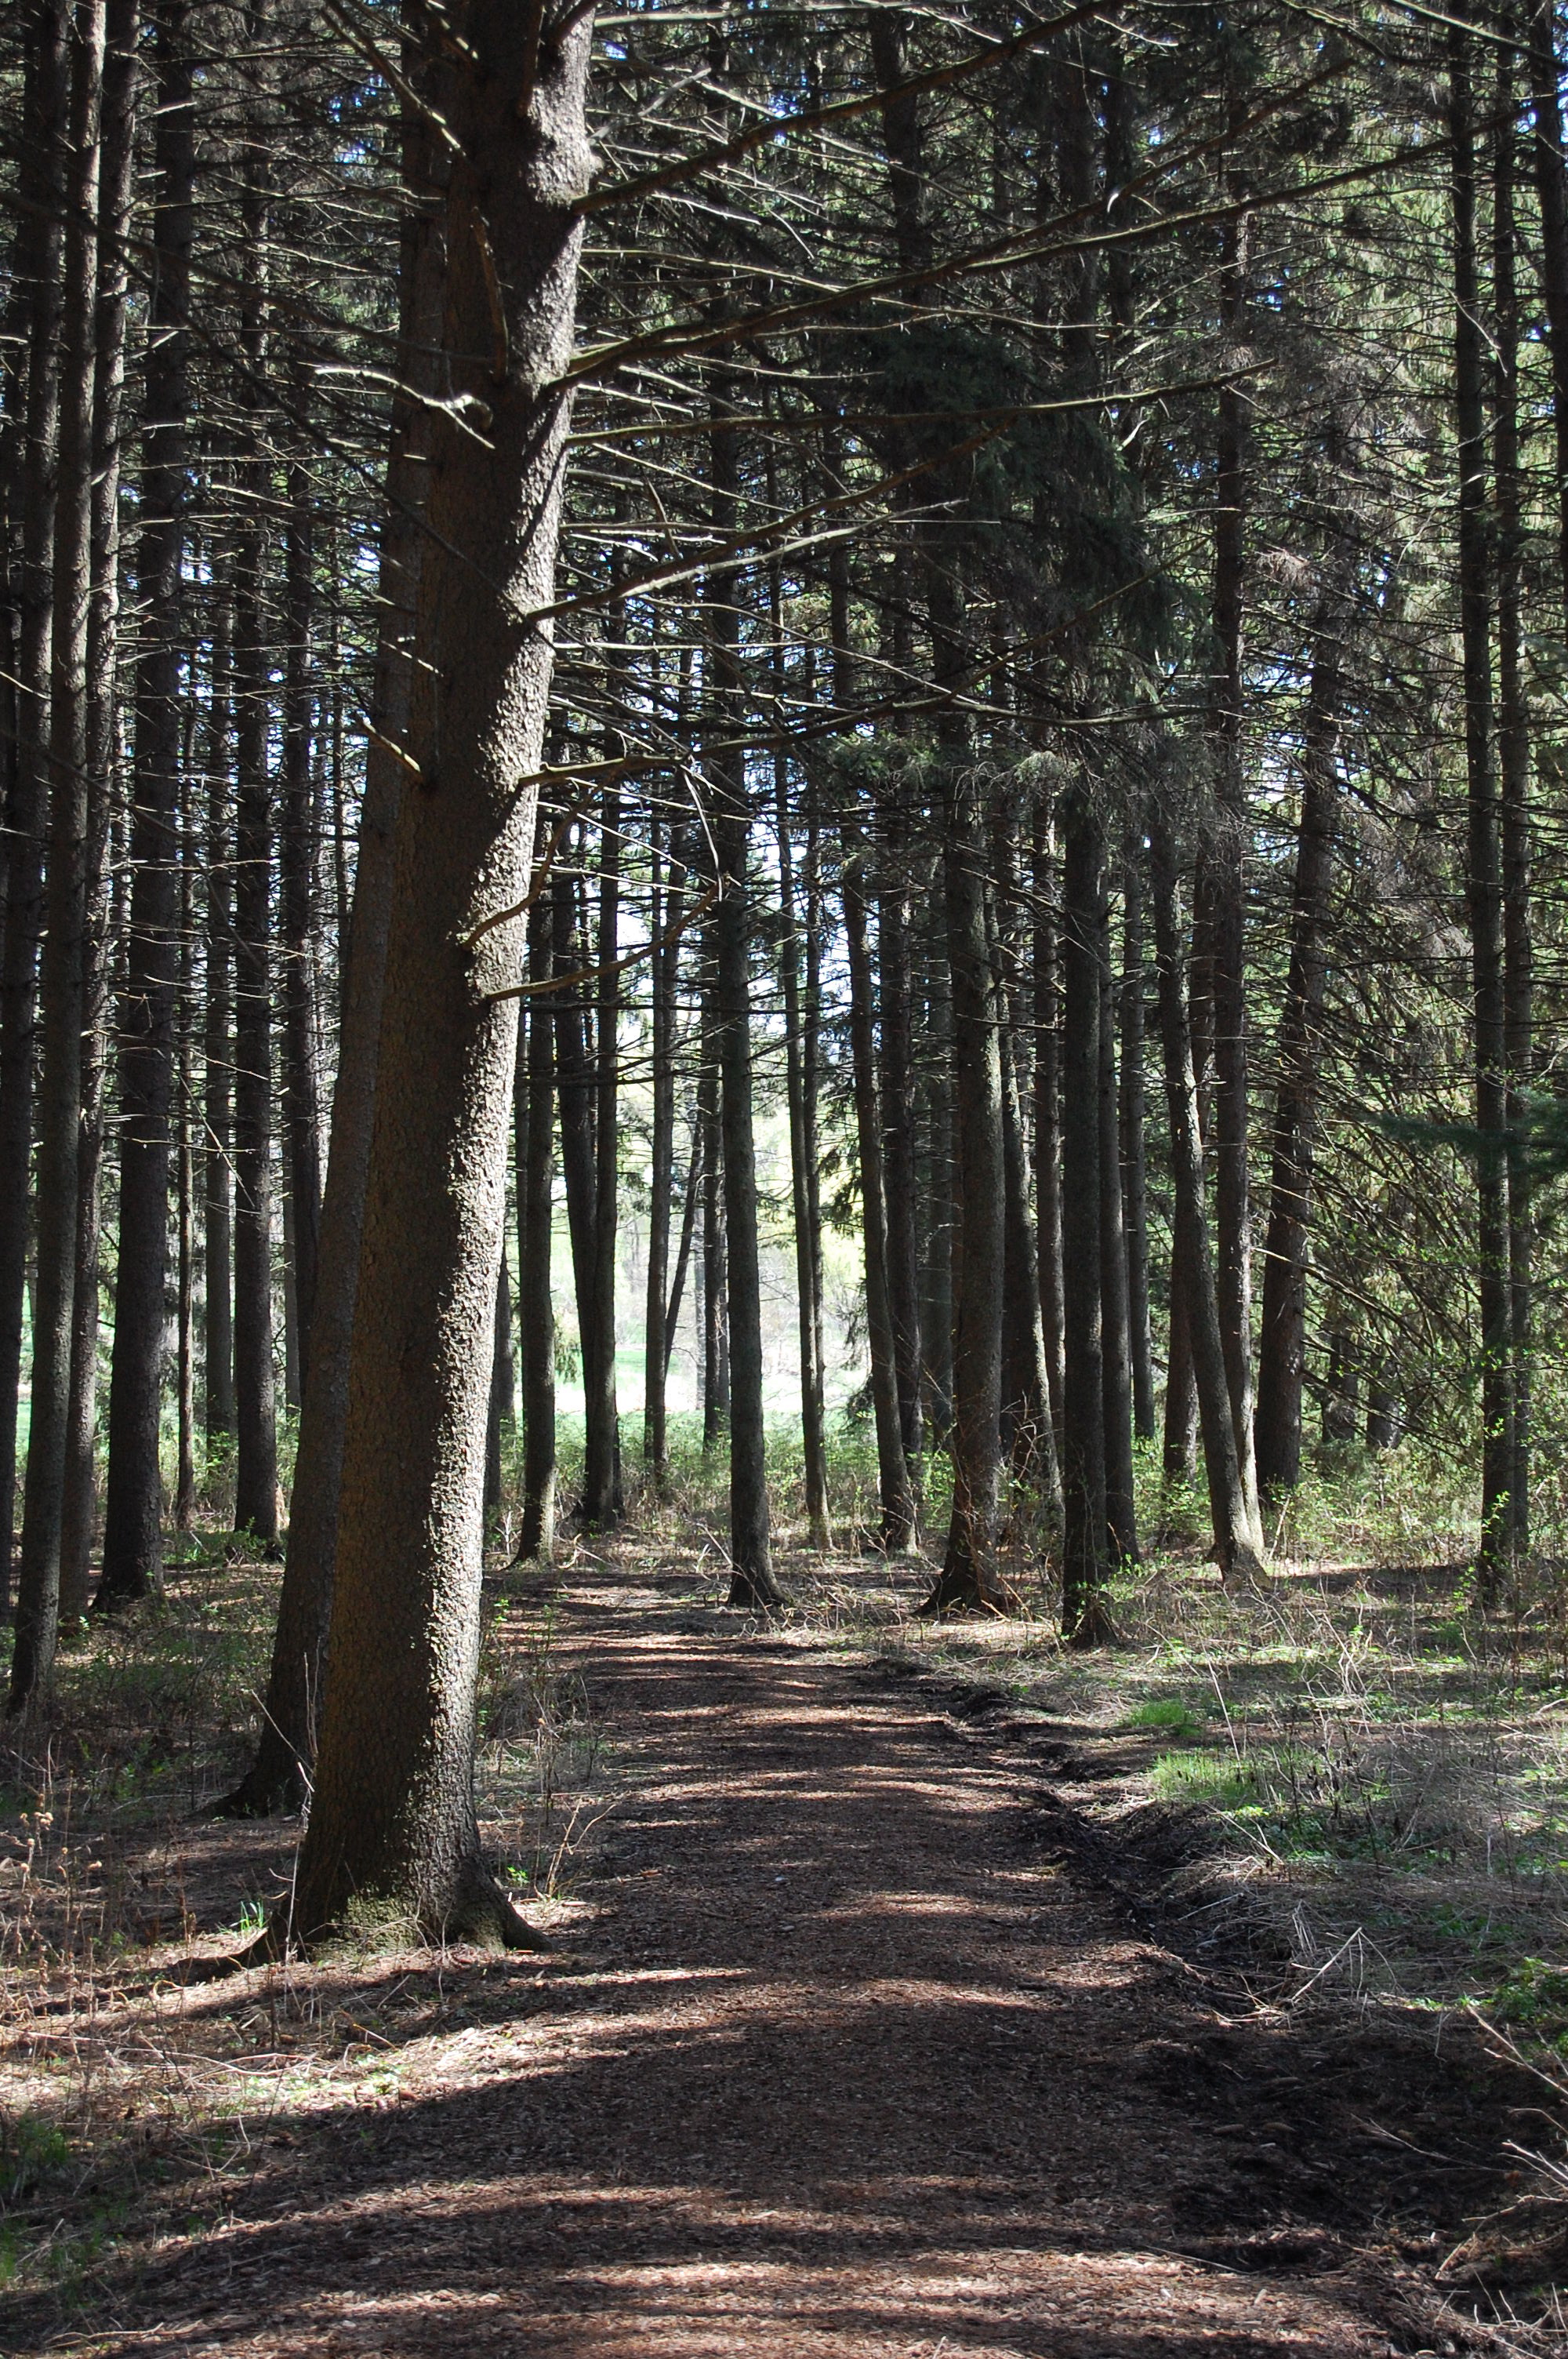 Photo of Spruce Plot at The Morton Arboretum, a grove of tall spruce trees